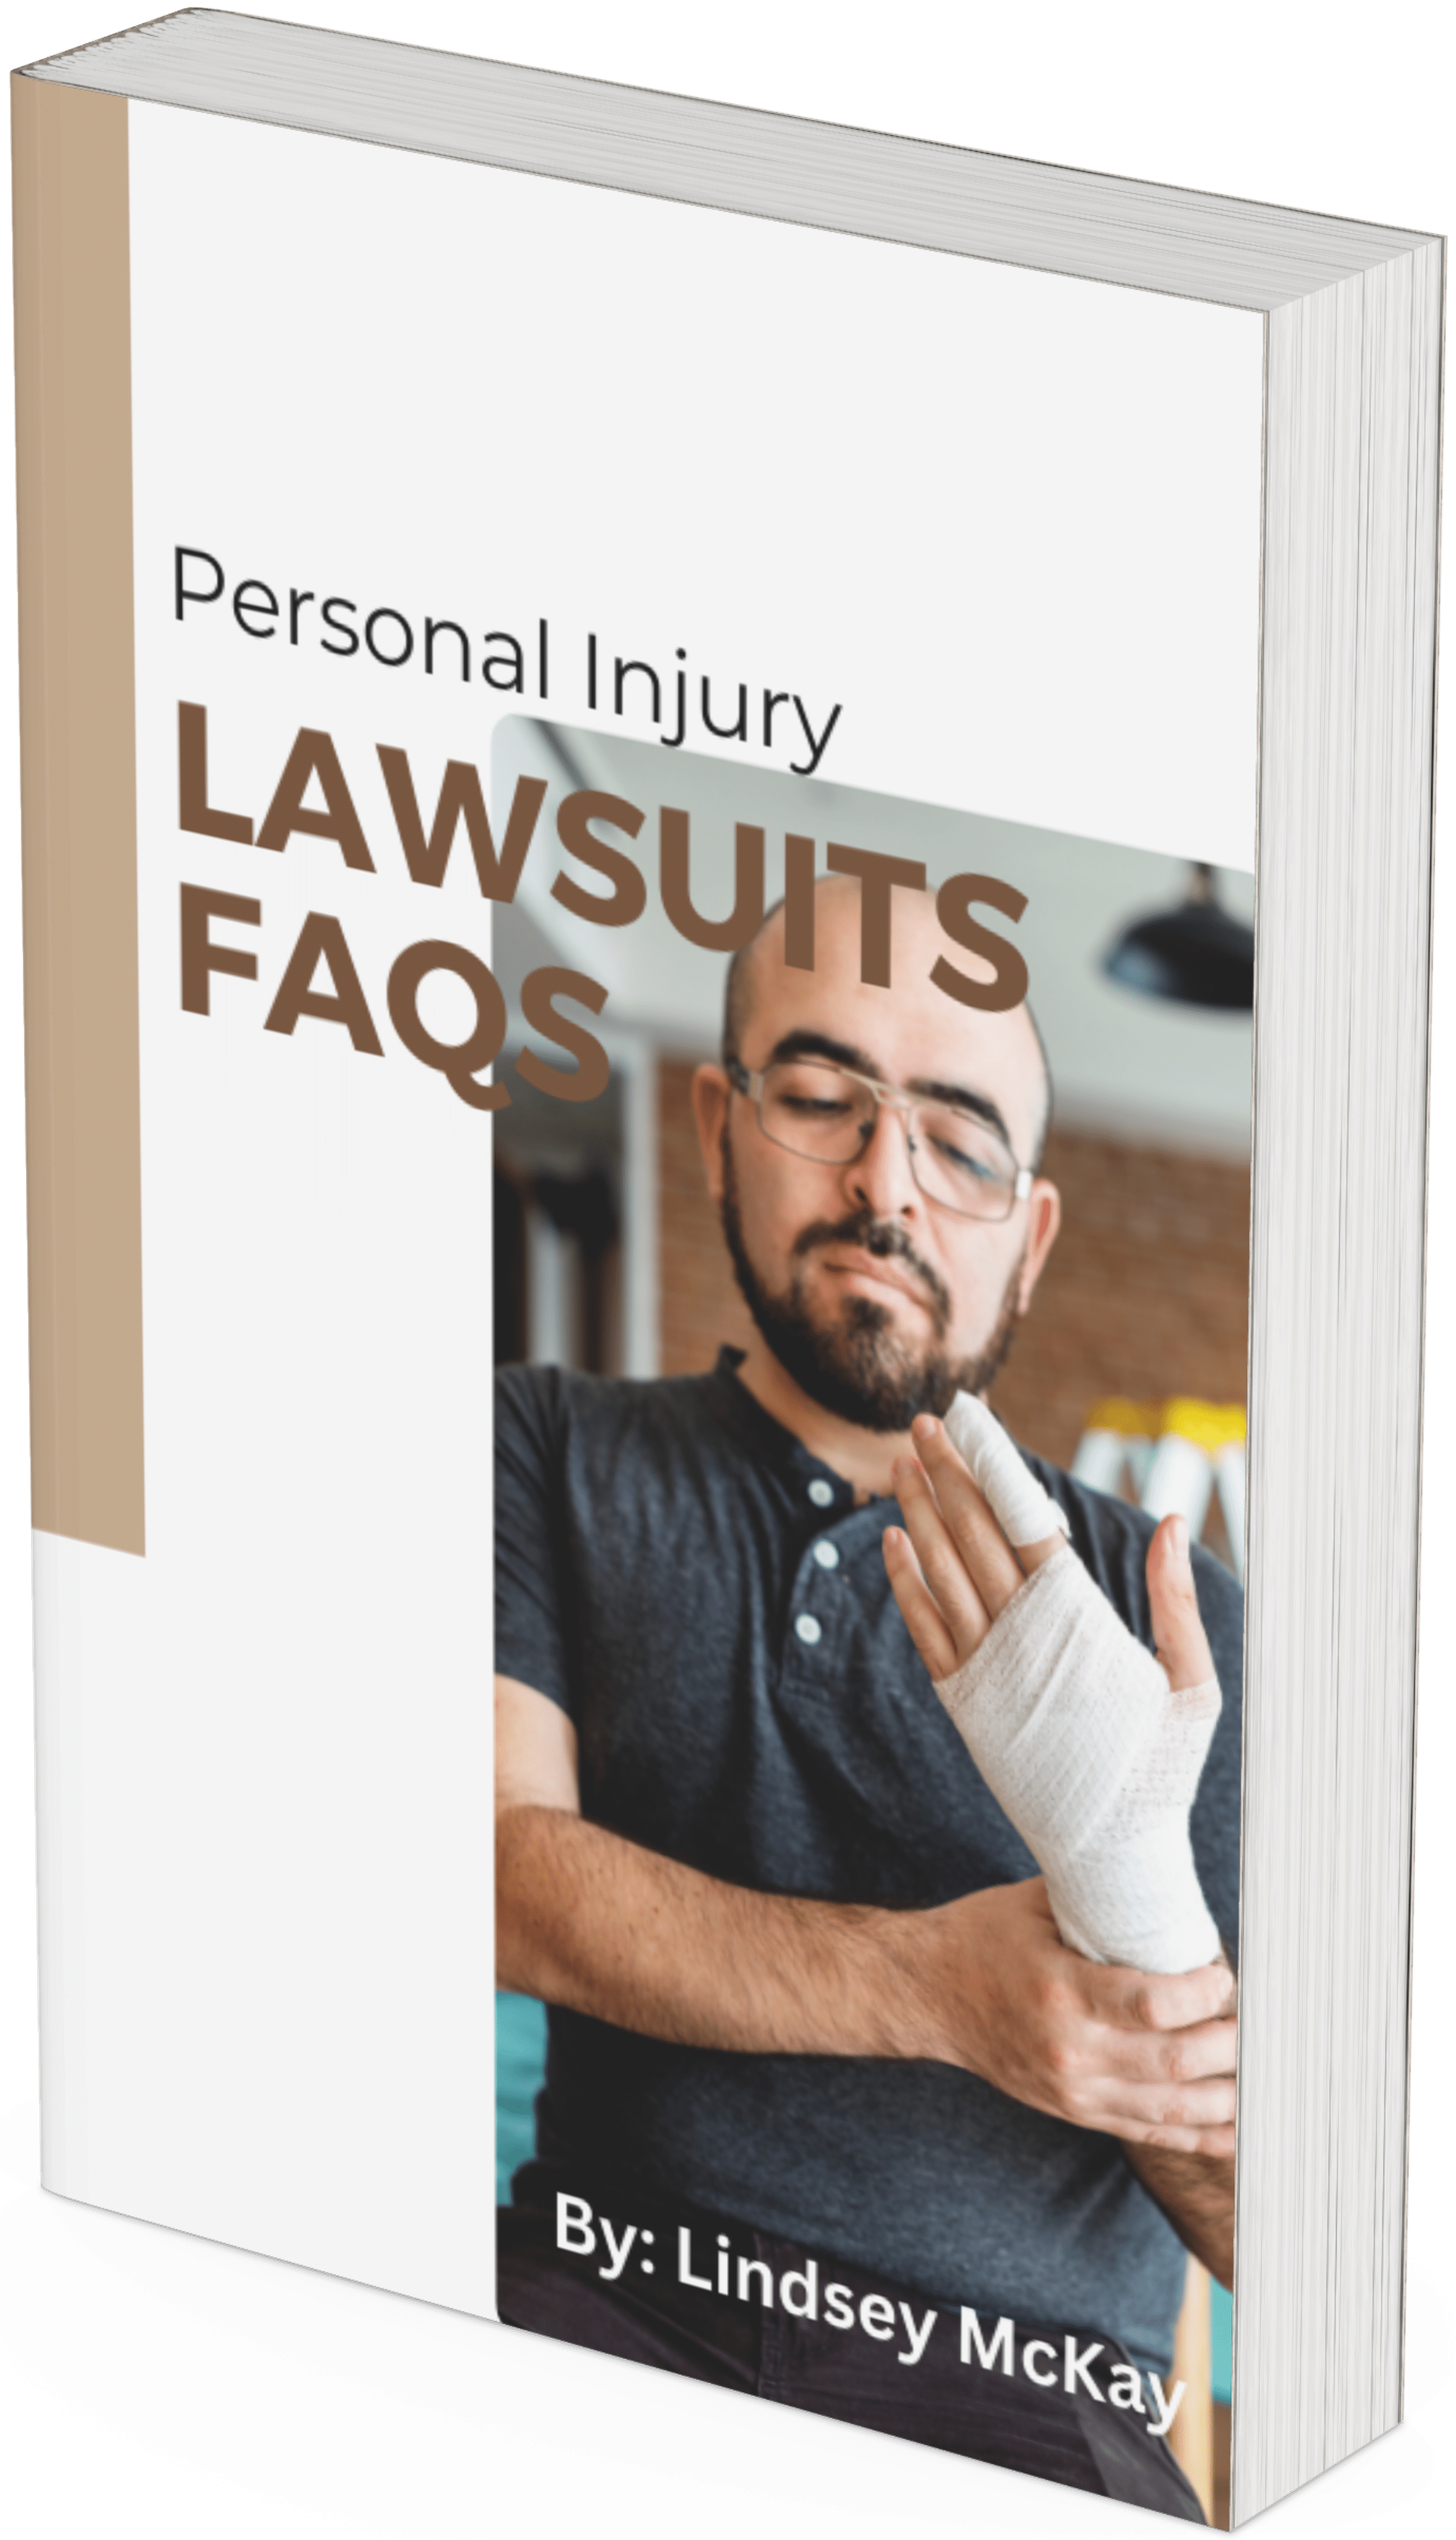 Personal Injury Lawsuits FAQs